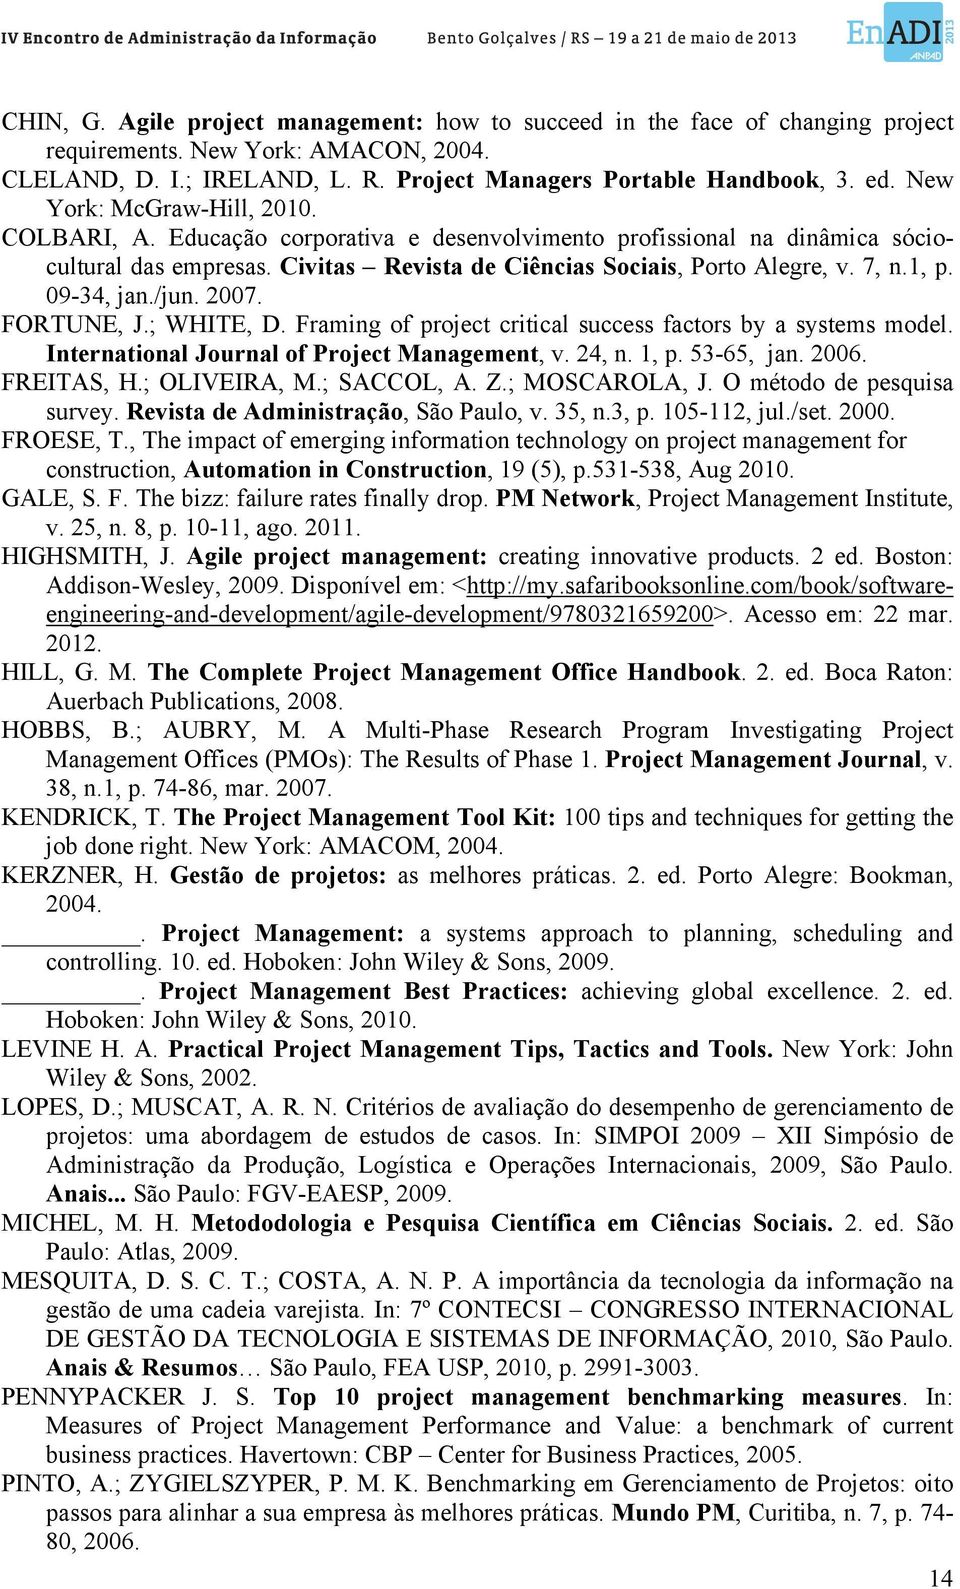 09-34, jan./jun. 2007. FORTUNE, J.; WHITE, D. Framing of project critical success factors by a systems model. International Journal of Project Management, v. 24, n. 1, p. 53-65, jan. 2006. FREITAS, H.